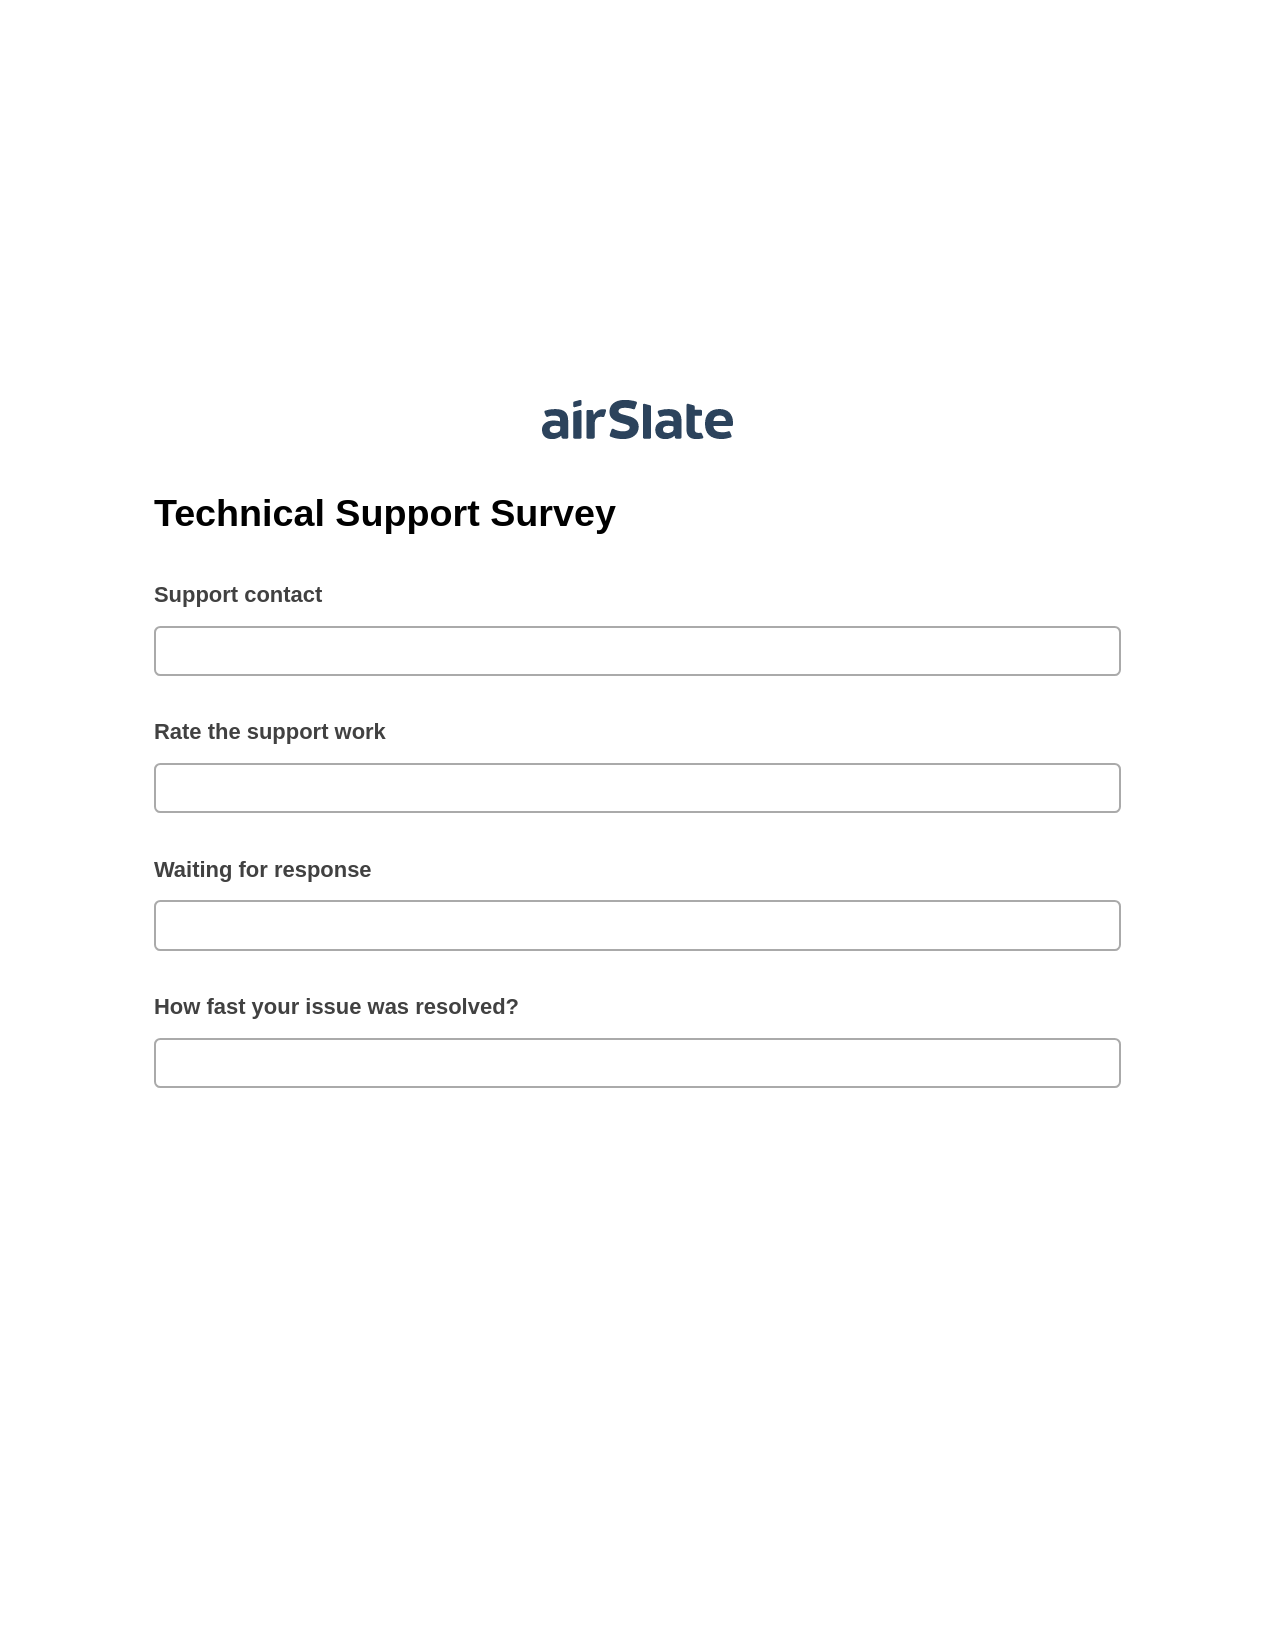 Multirole Technical Support Survey Pre-fill from Salesforce Records with SOQL Bot, Reminder Bot, Archive to Box Bot